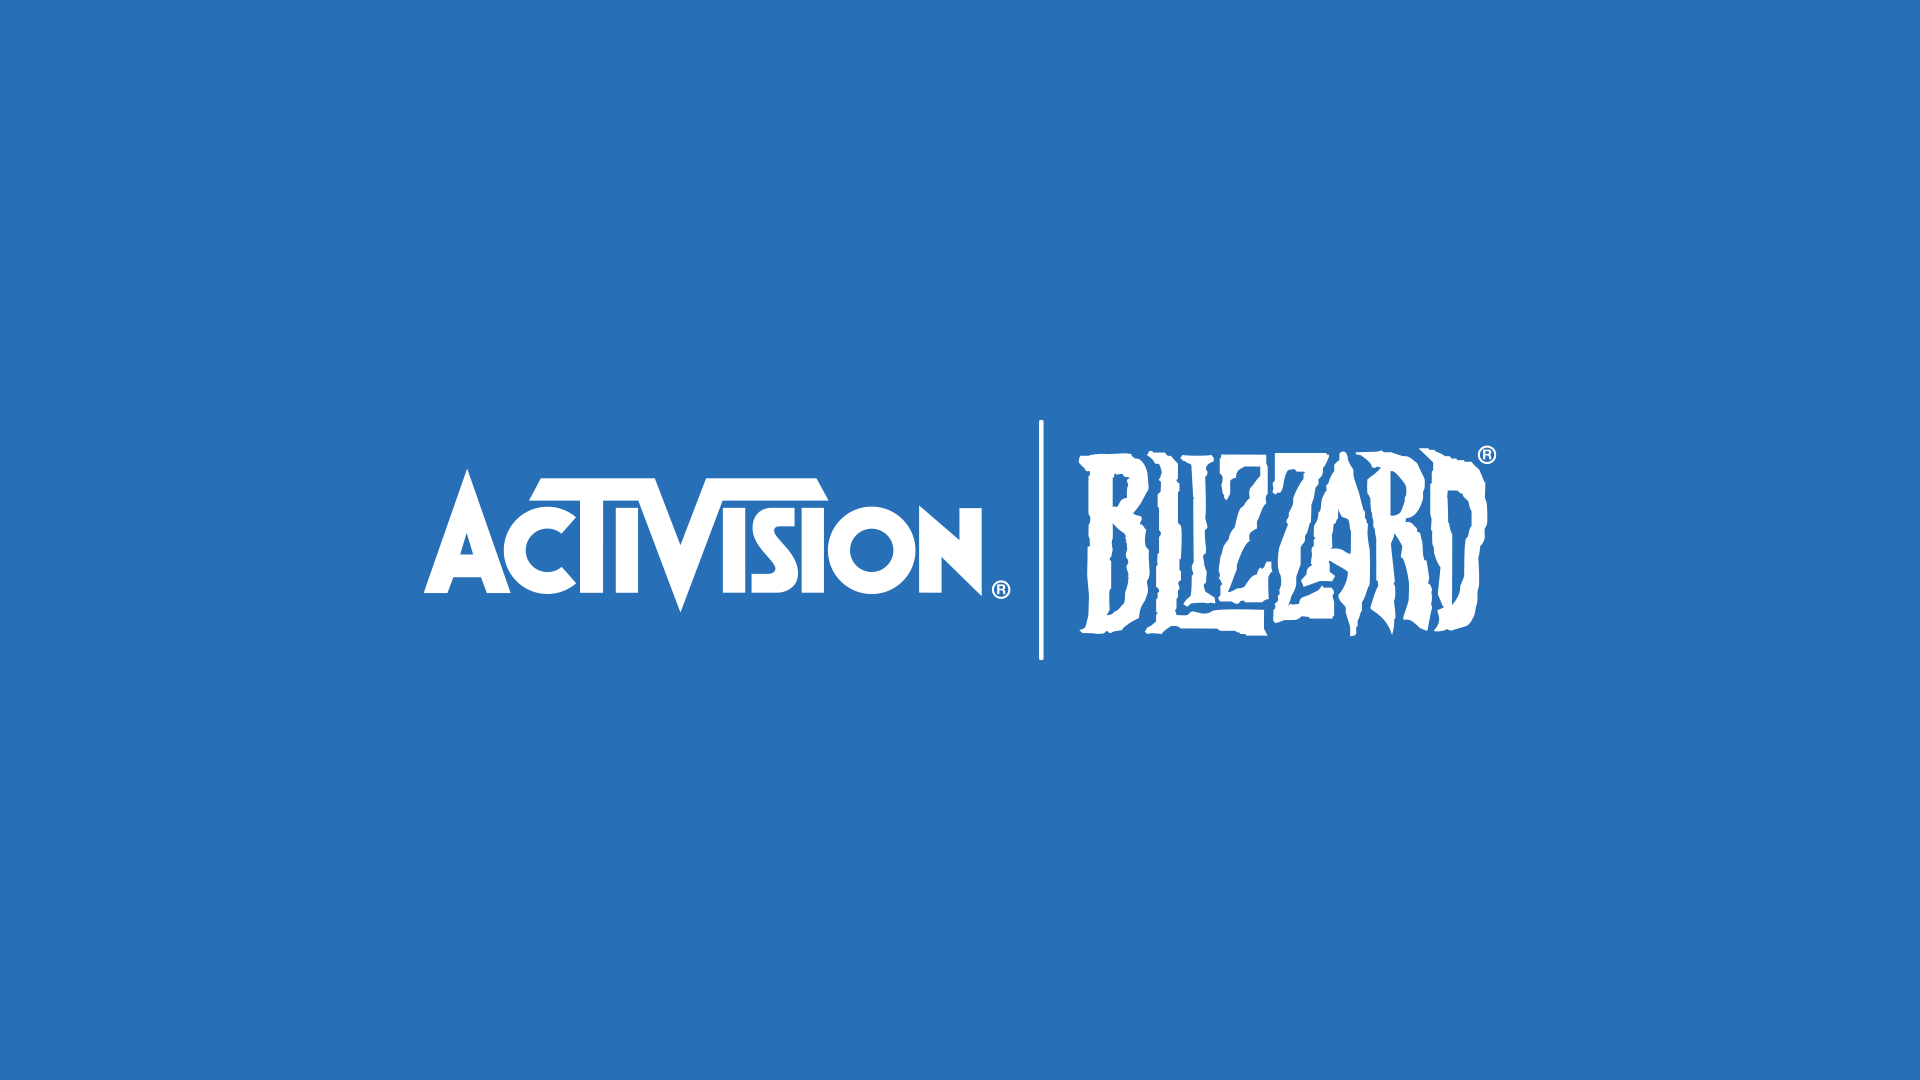 Activision Blizzard, Inc. is an American video game holding company based in Santa Monica, California. The company was founded in July 2008 through the merger of Activision, Inc. and Vivendi Games.